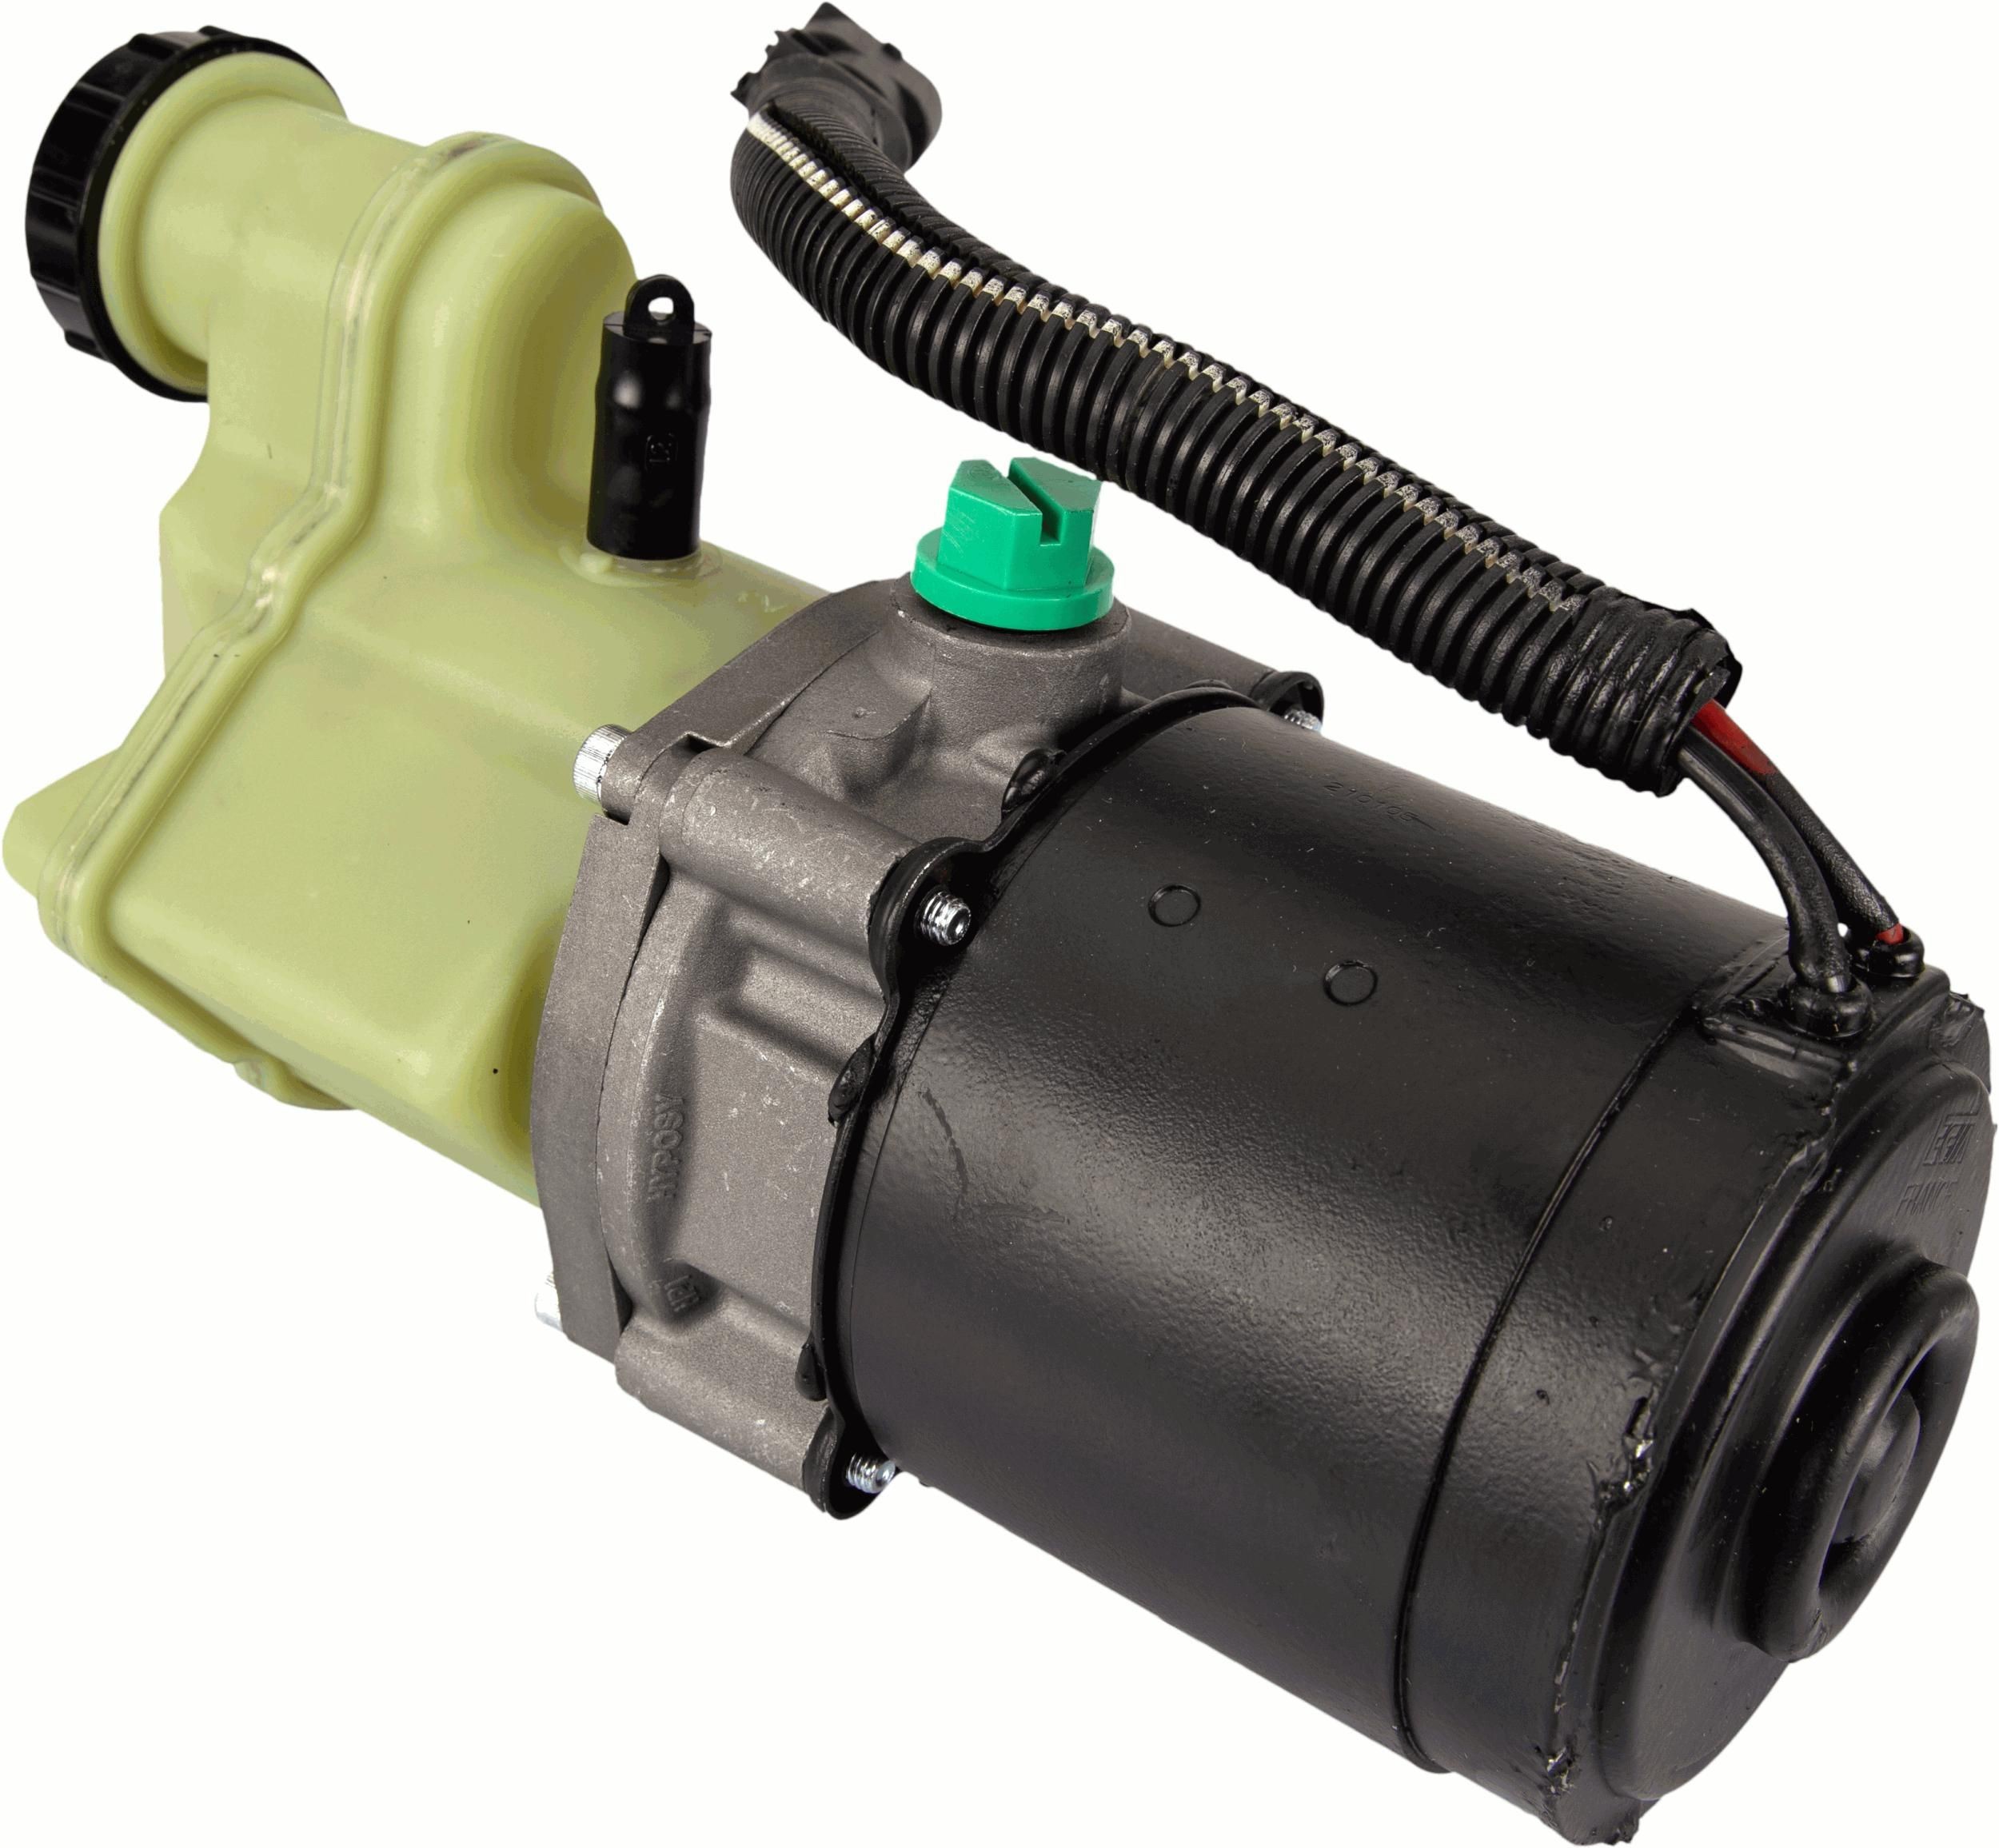 Original JER120 TRW Power steering pump experience and price